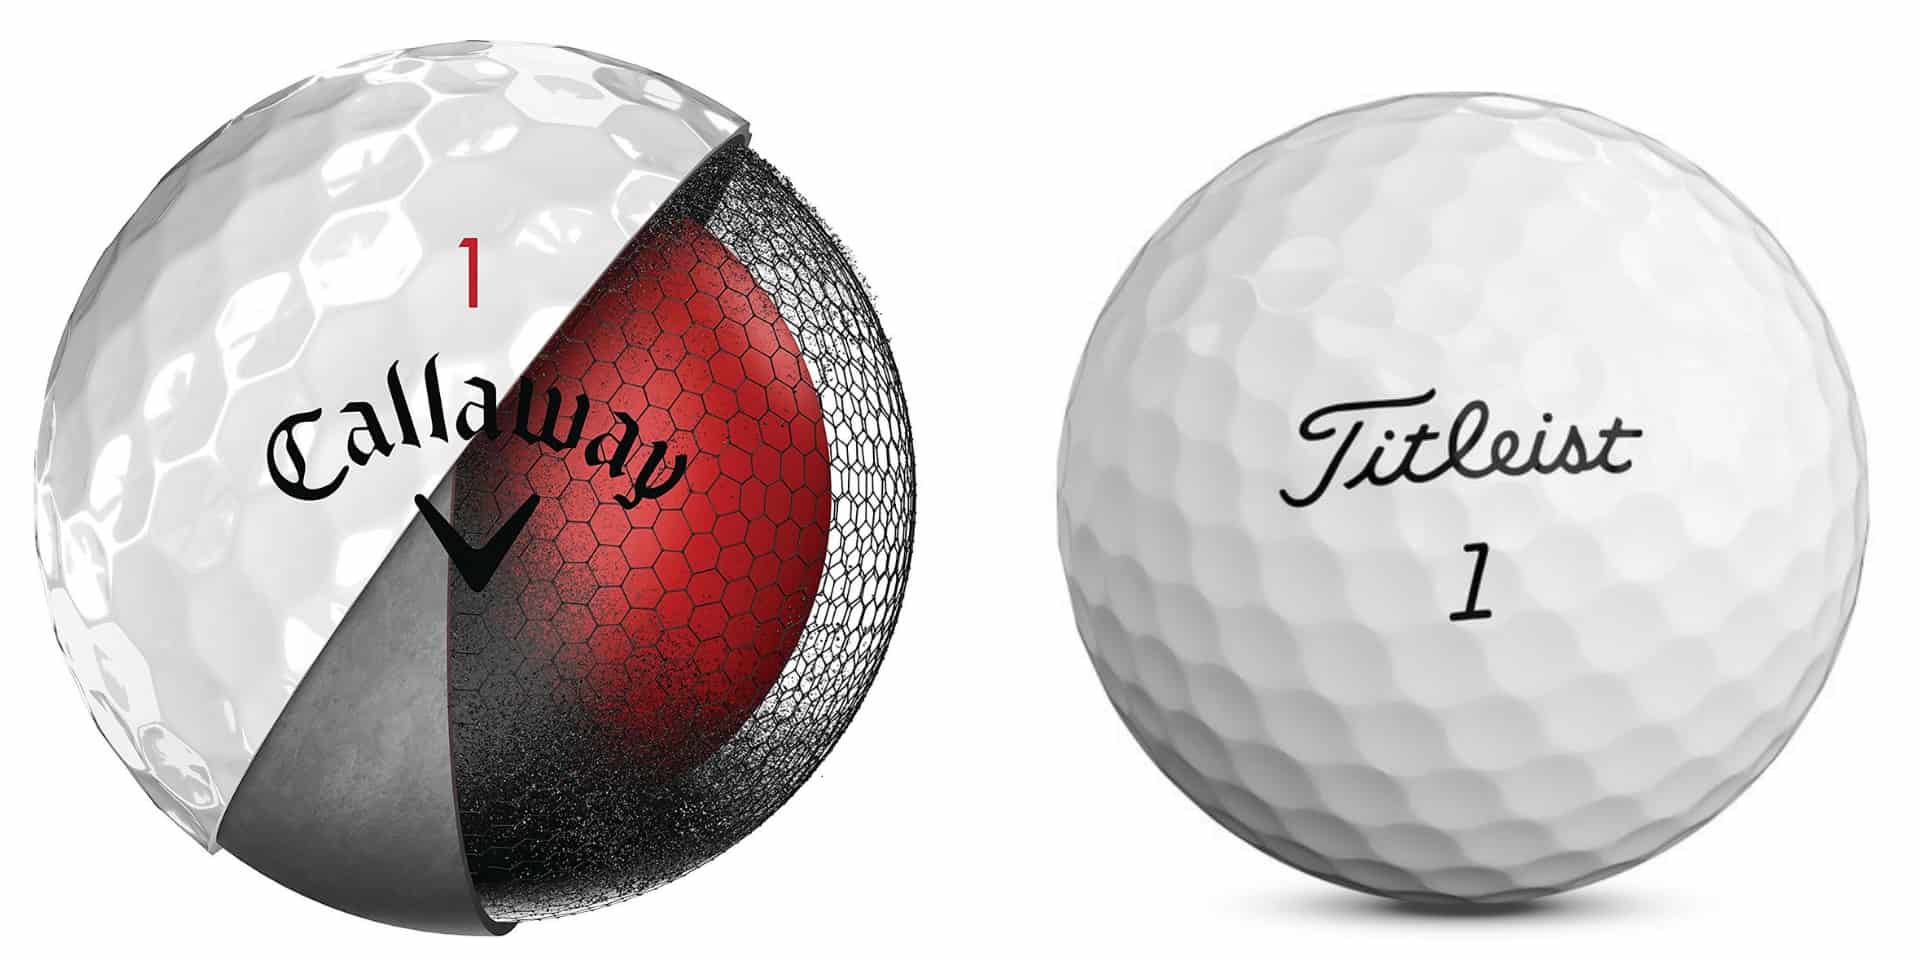 Chrome Soft vs. Pro V1 (Can Callaway Knock Titliest Off The Top?)